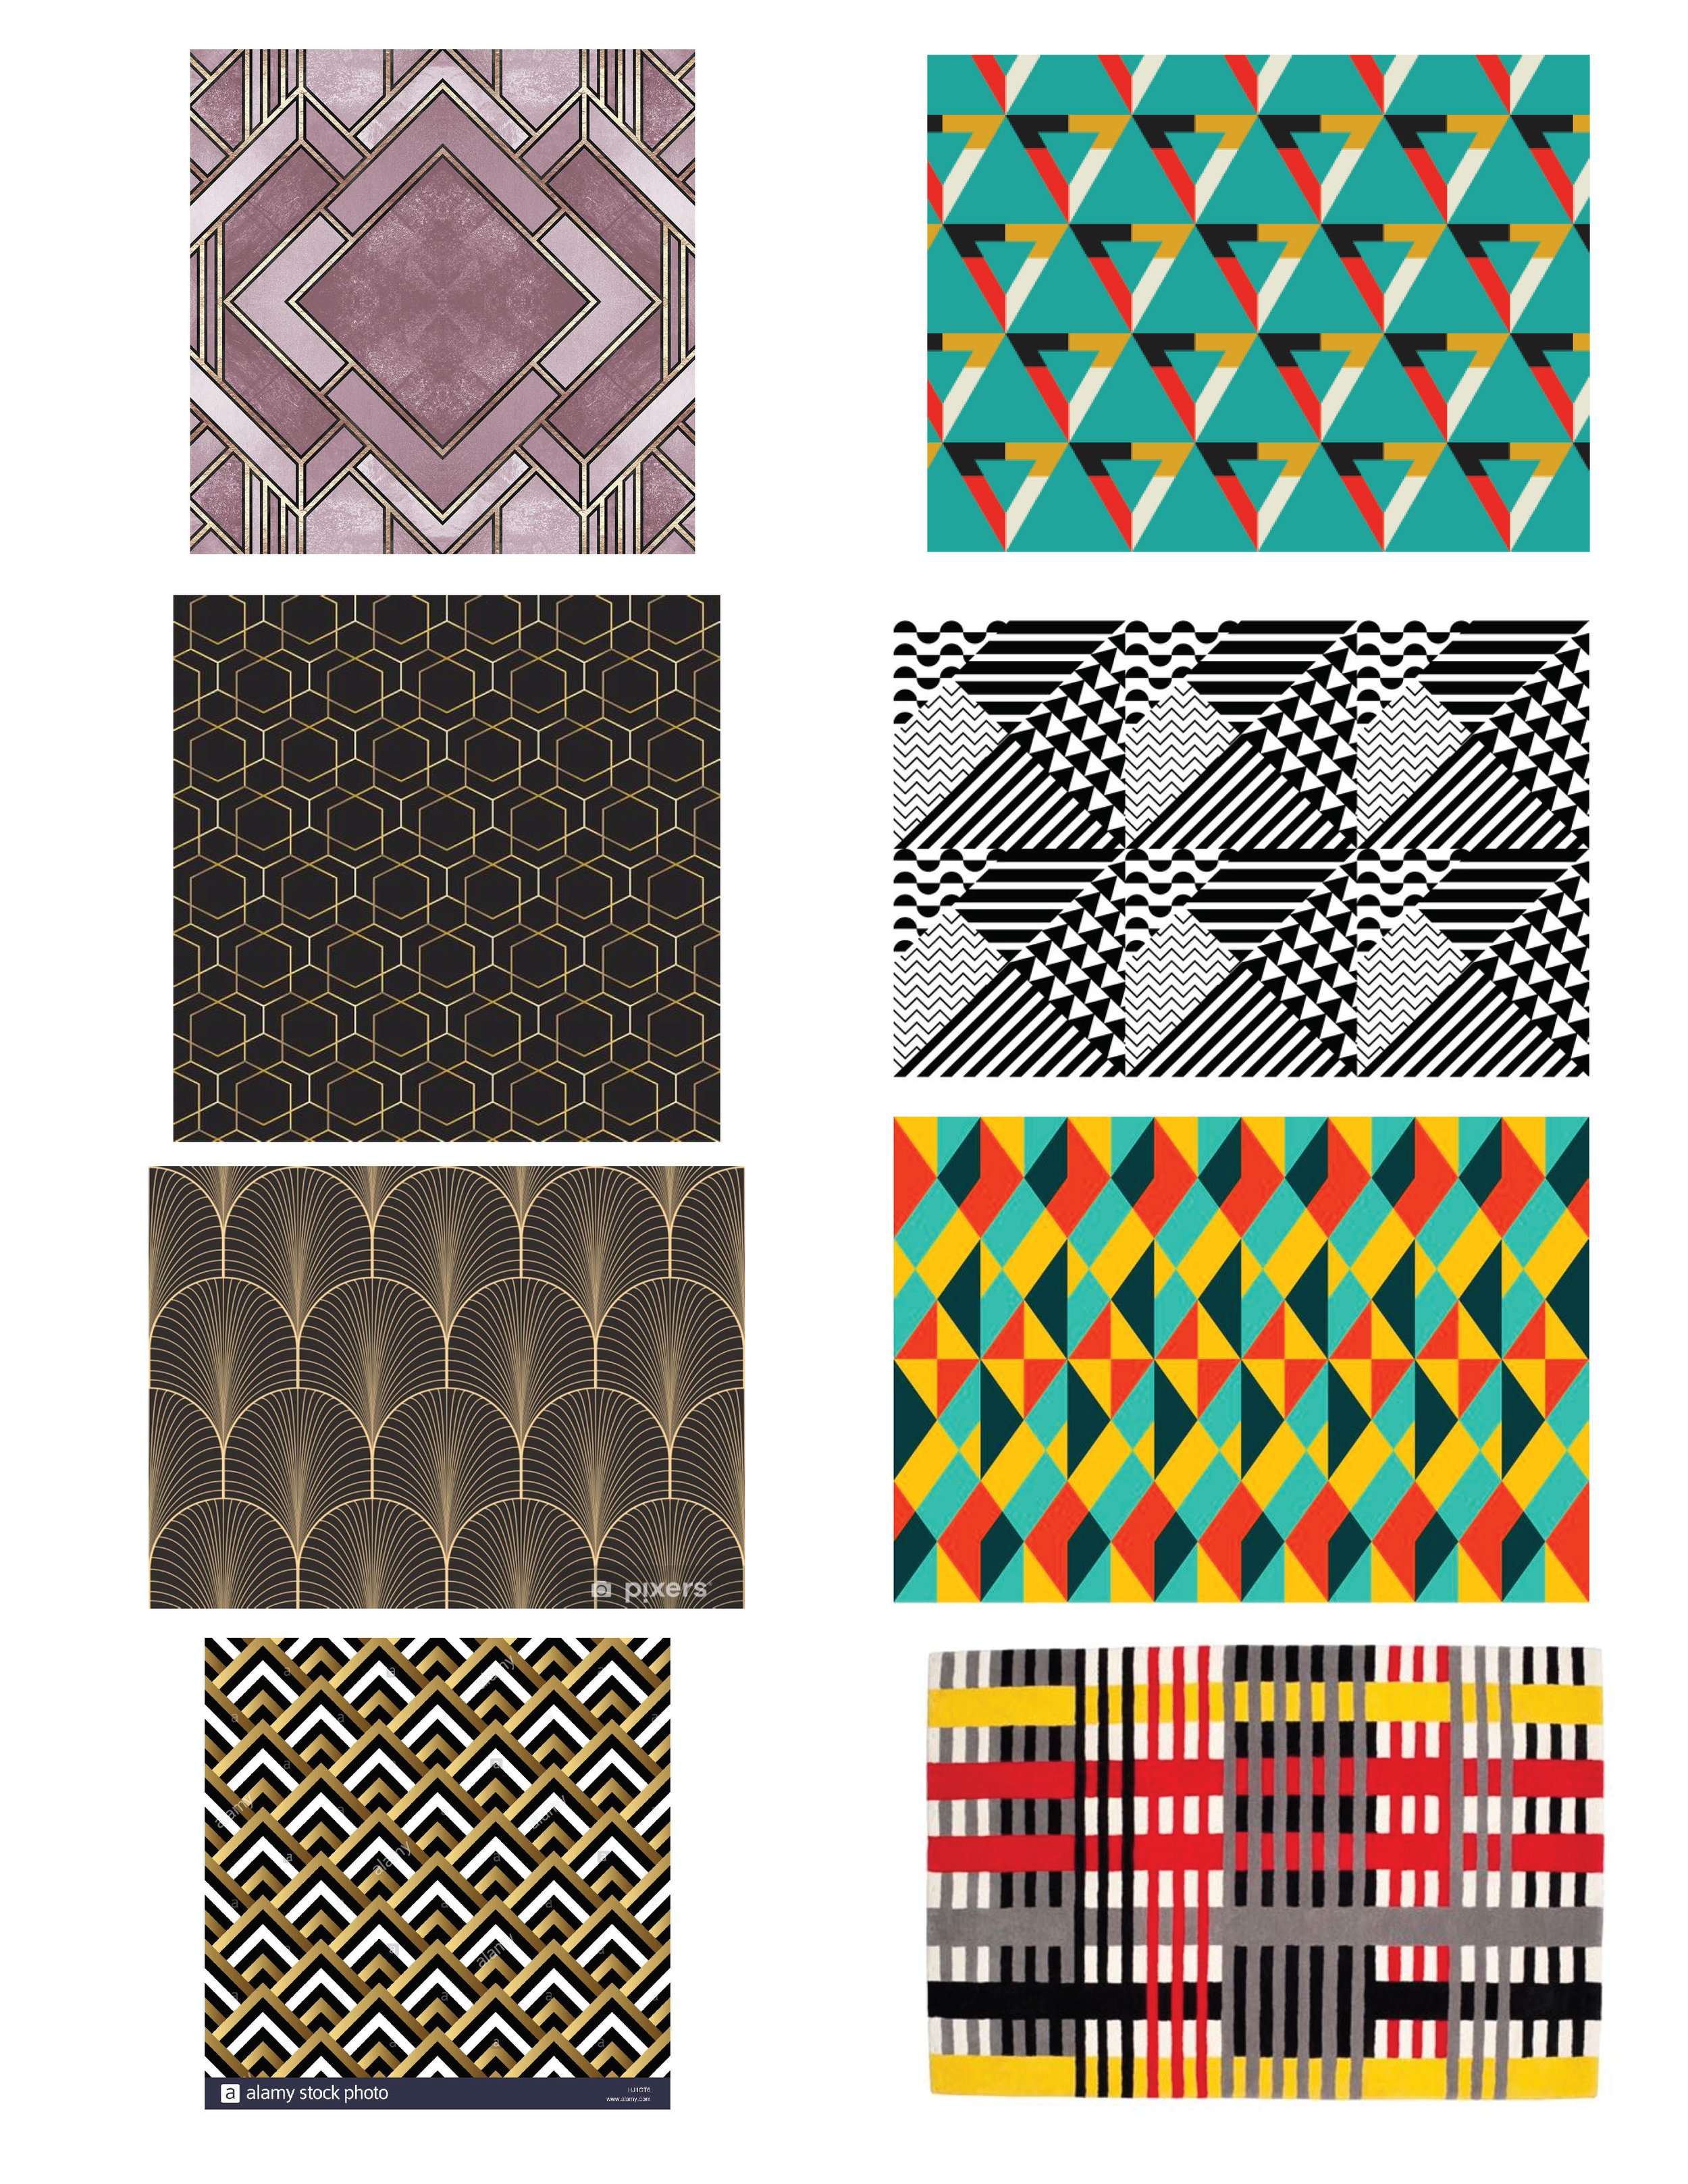 Pattern Research images_Page_2.jpg